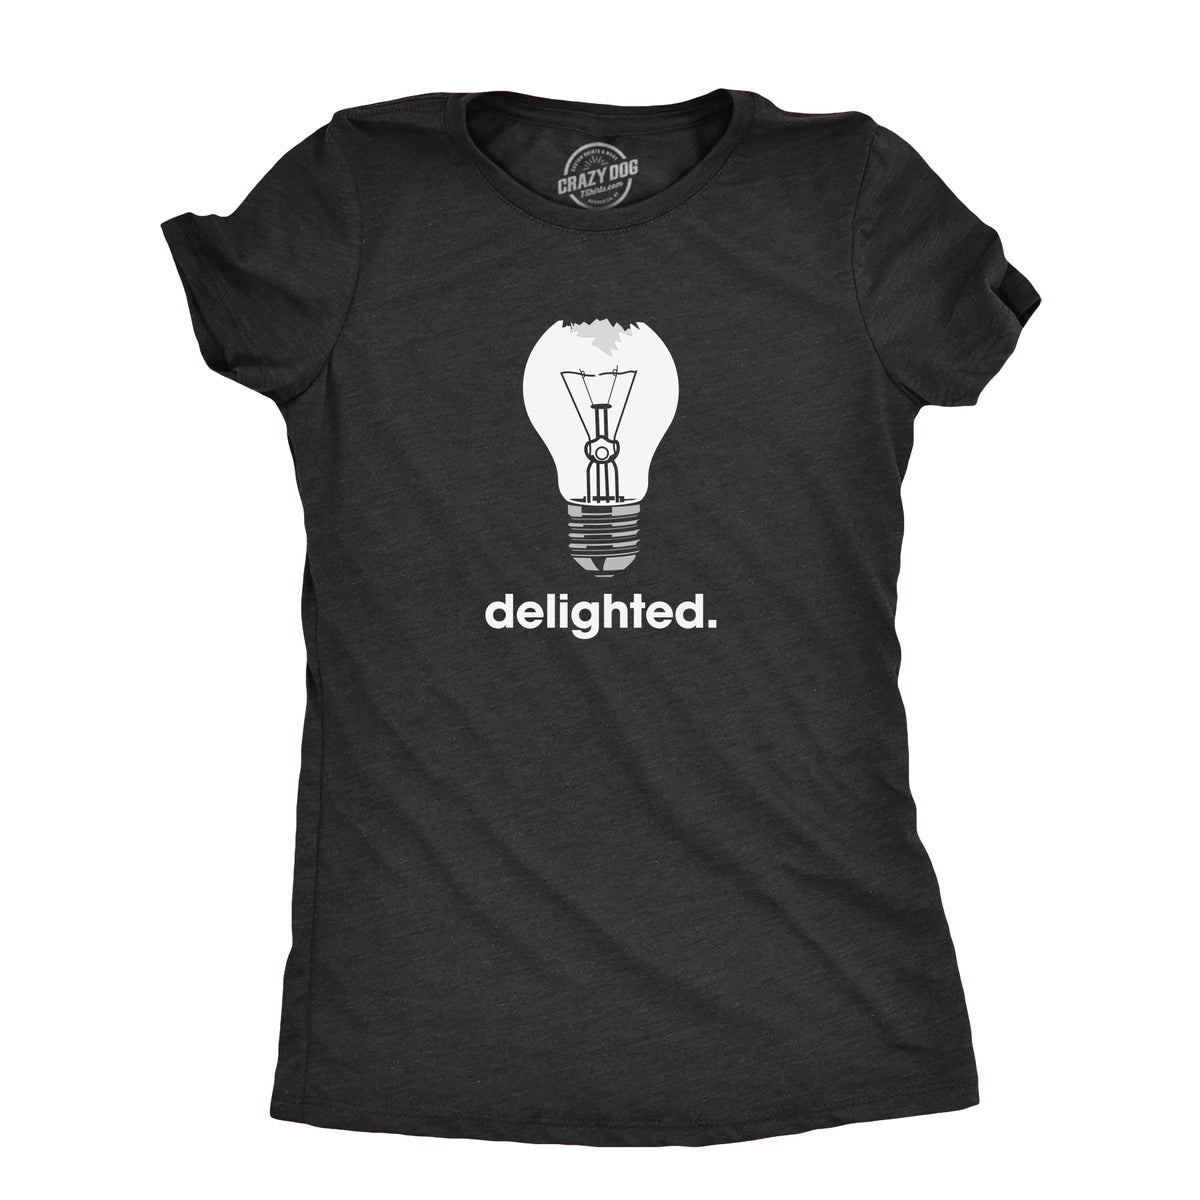 Funny Heather Black - DELIGHTED Delighted Womens T Shirt Nerdy sarcastic Tee